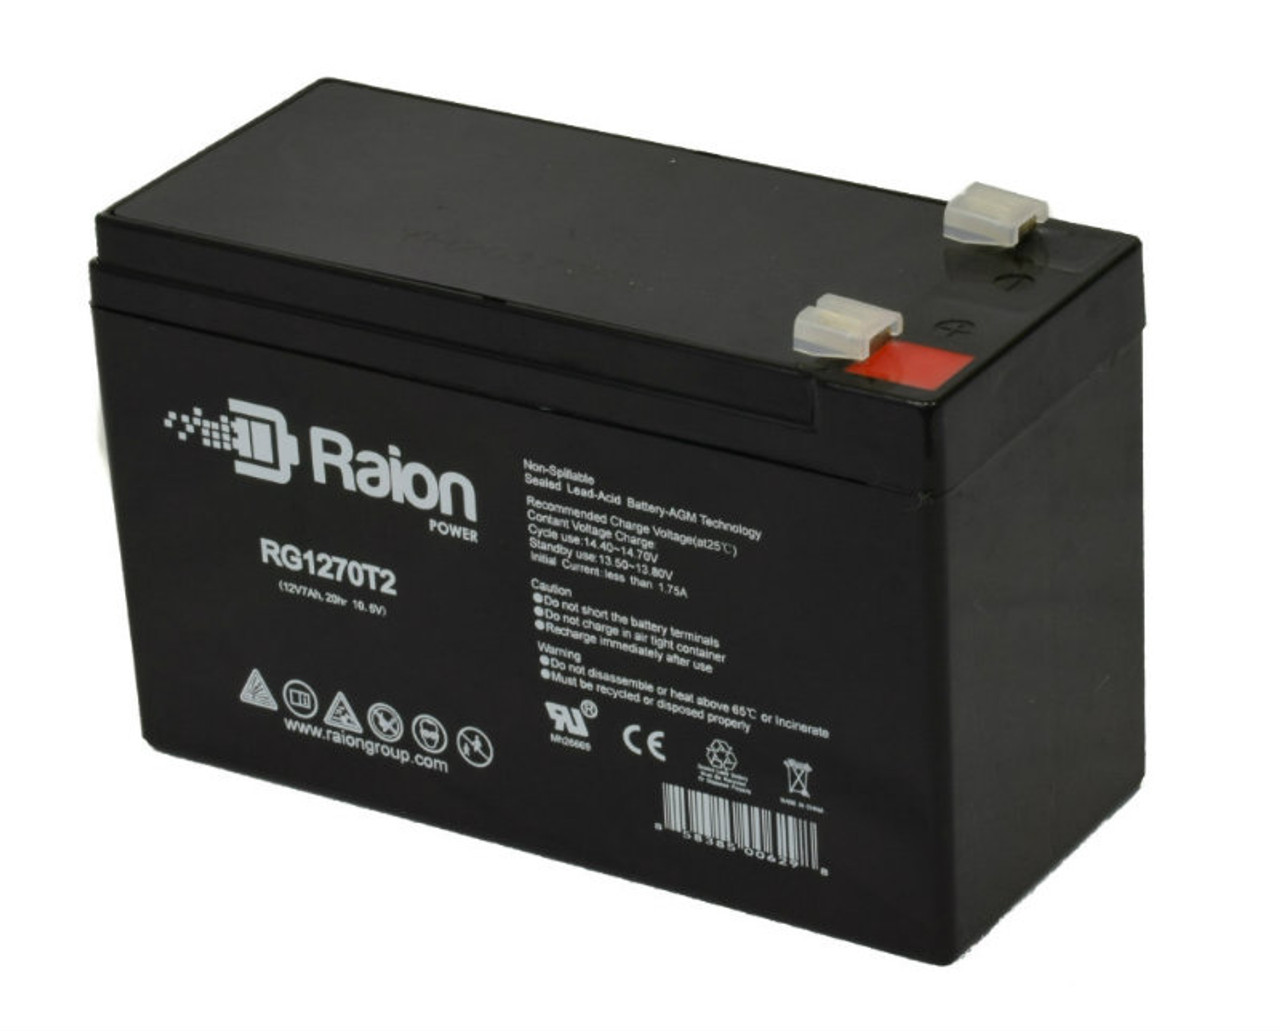 Raion Power RG1270T1 12V 7Ah Non-Spillable Replacement Battery for Power Source WP7.5-12 (91-190)